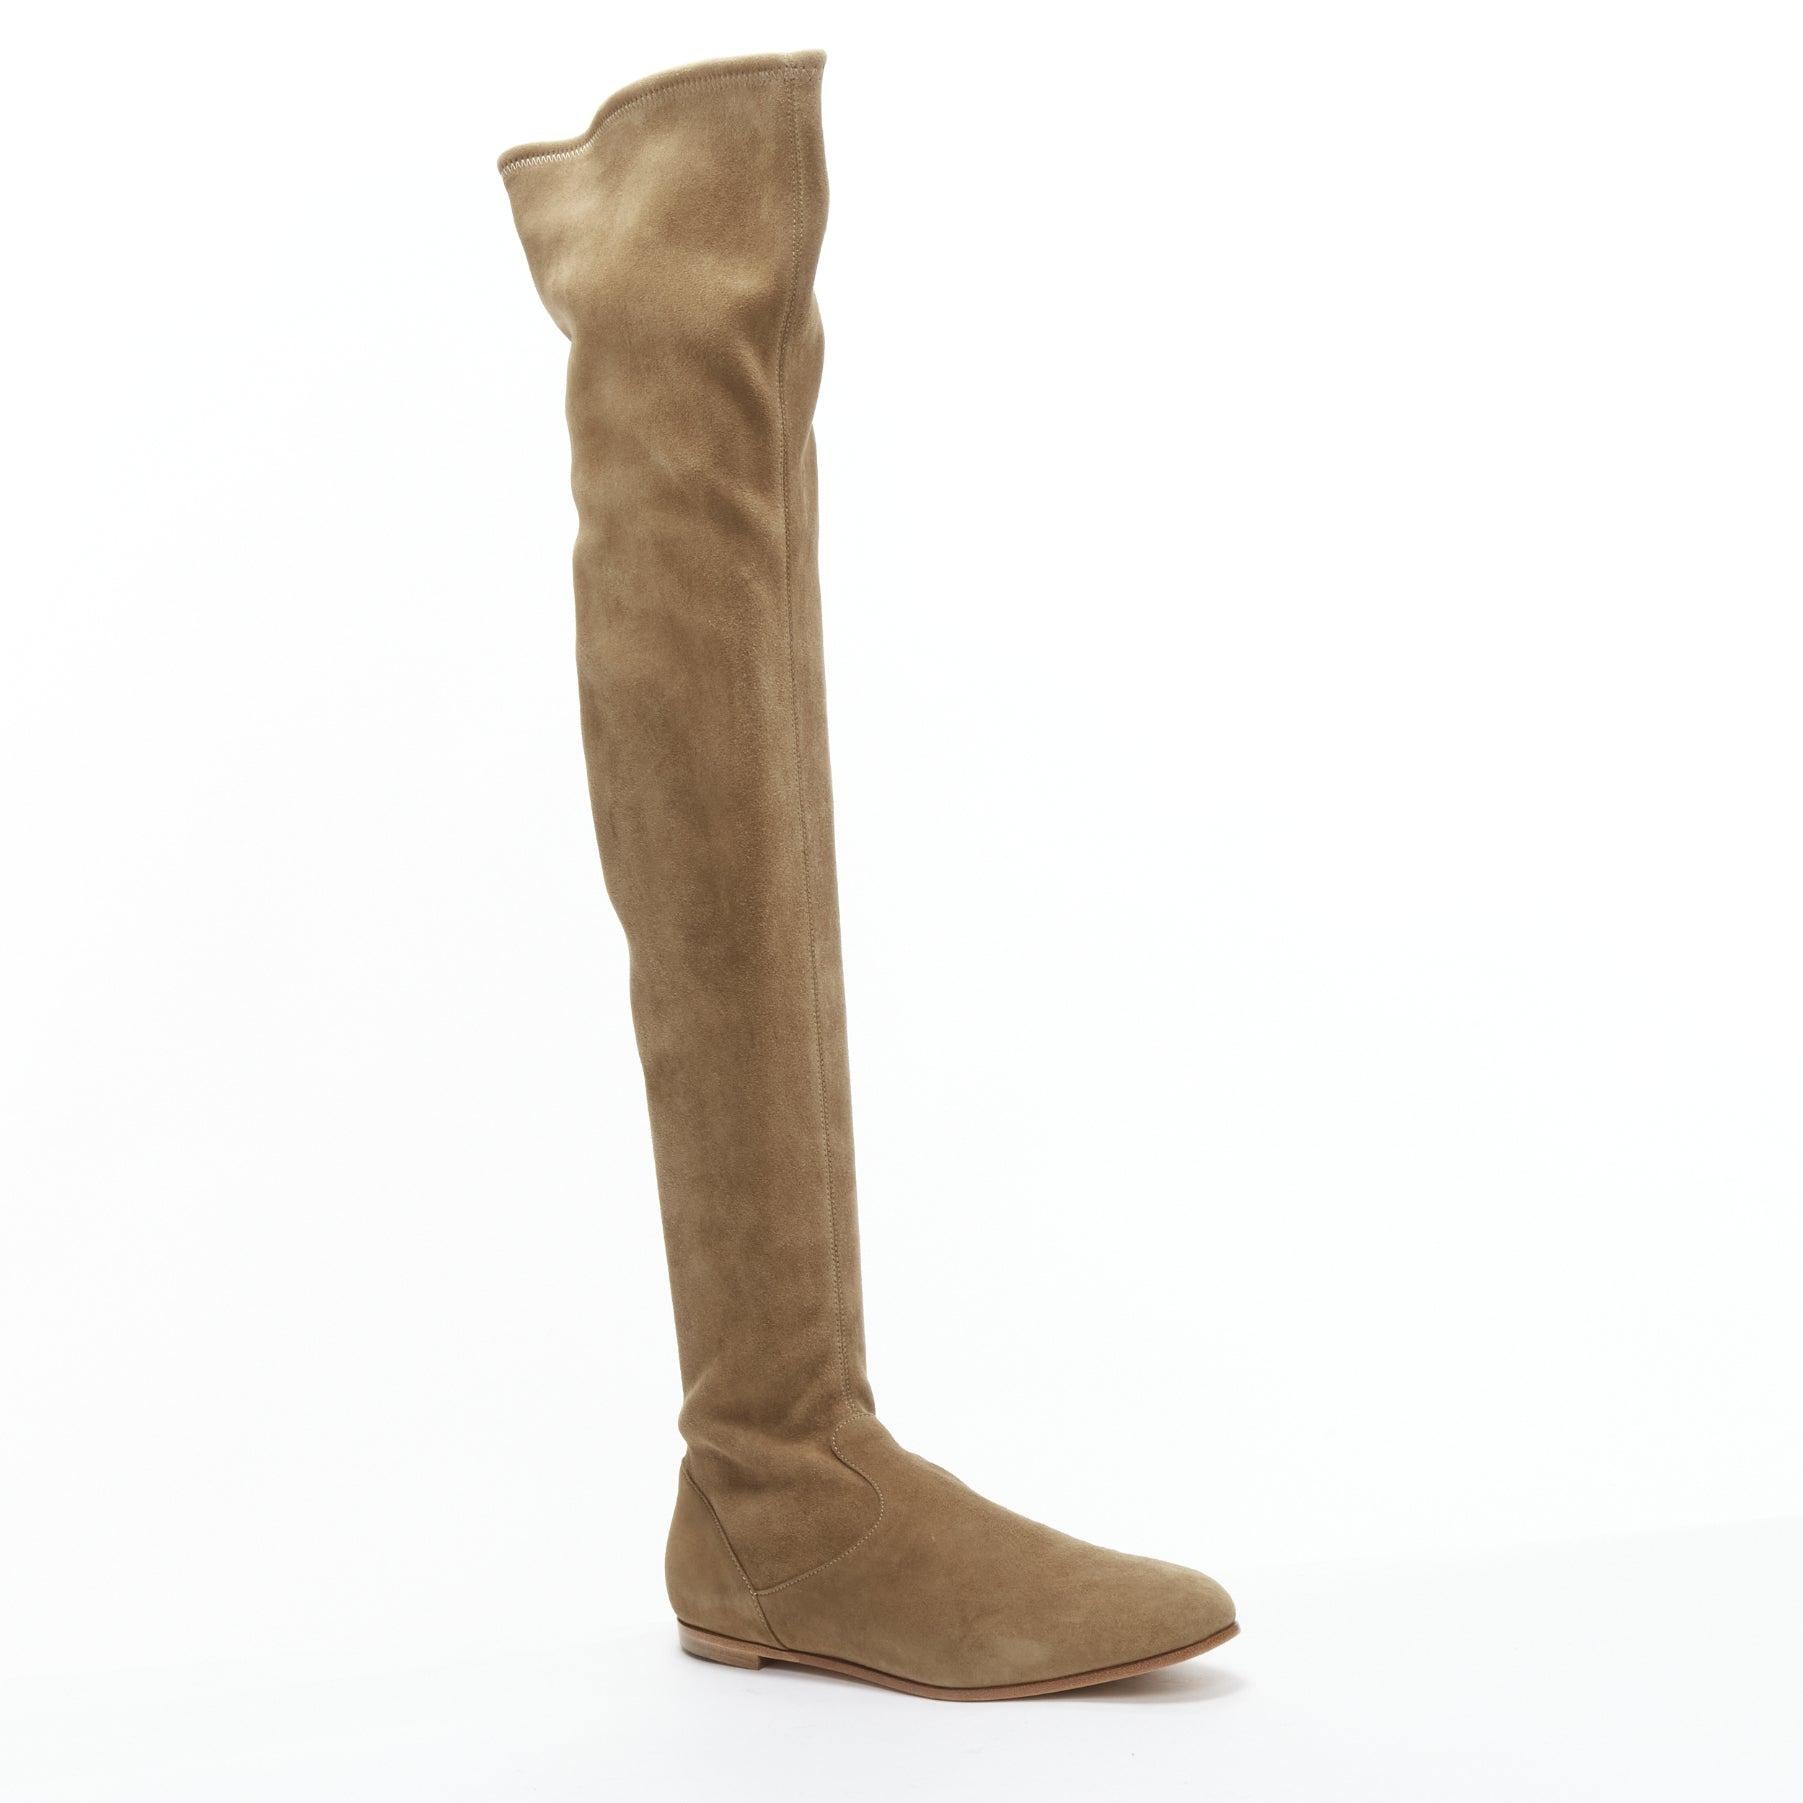 GIANVITO ROSSI Camoscio brown suede flat thigh high boots EU37
Reference: SNKO/A00379
Brand: Gianvito Rossi
Model: Camoscio
Material: Leather
Color: Brown
Pattern: Solid
Closure: Slip On
Lining: Black Fabric
Made in: Italy

CONDITION:
Condition: